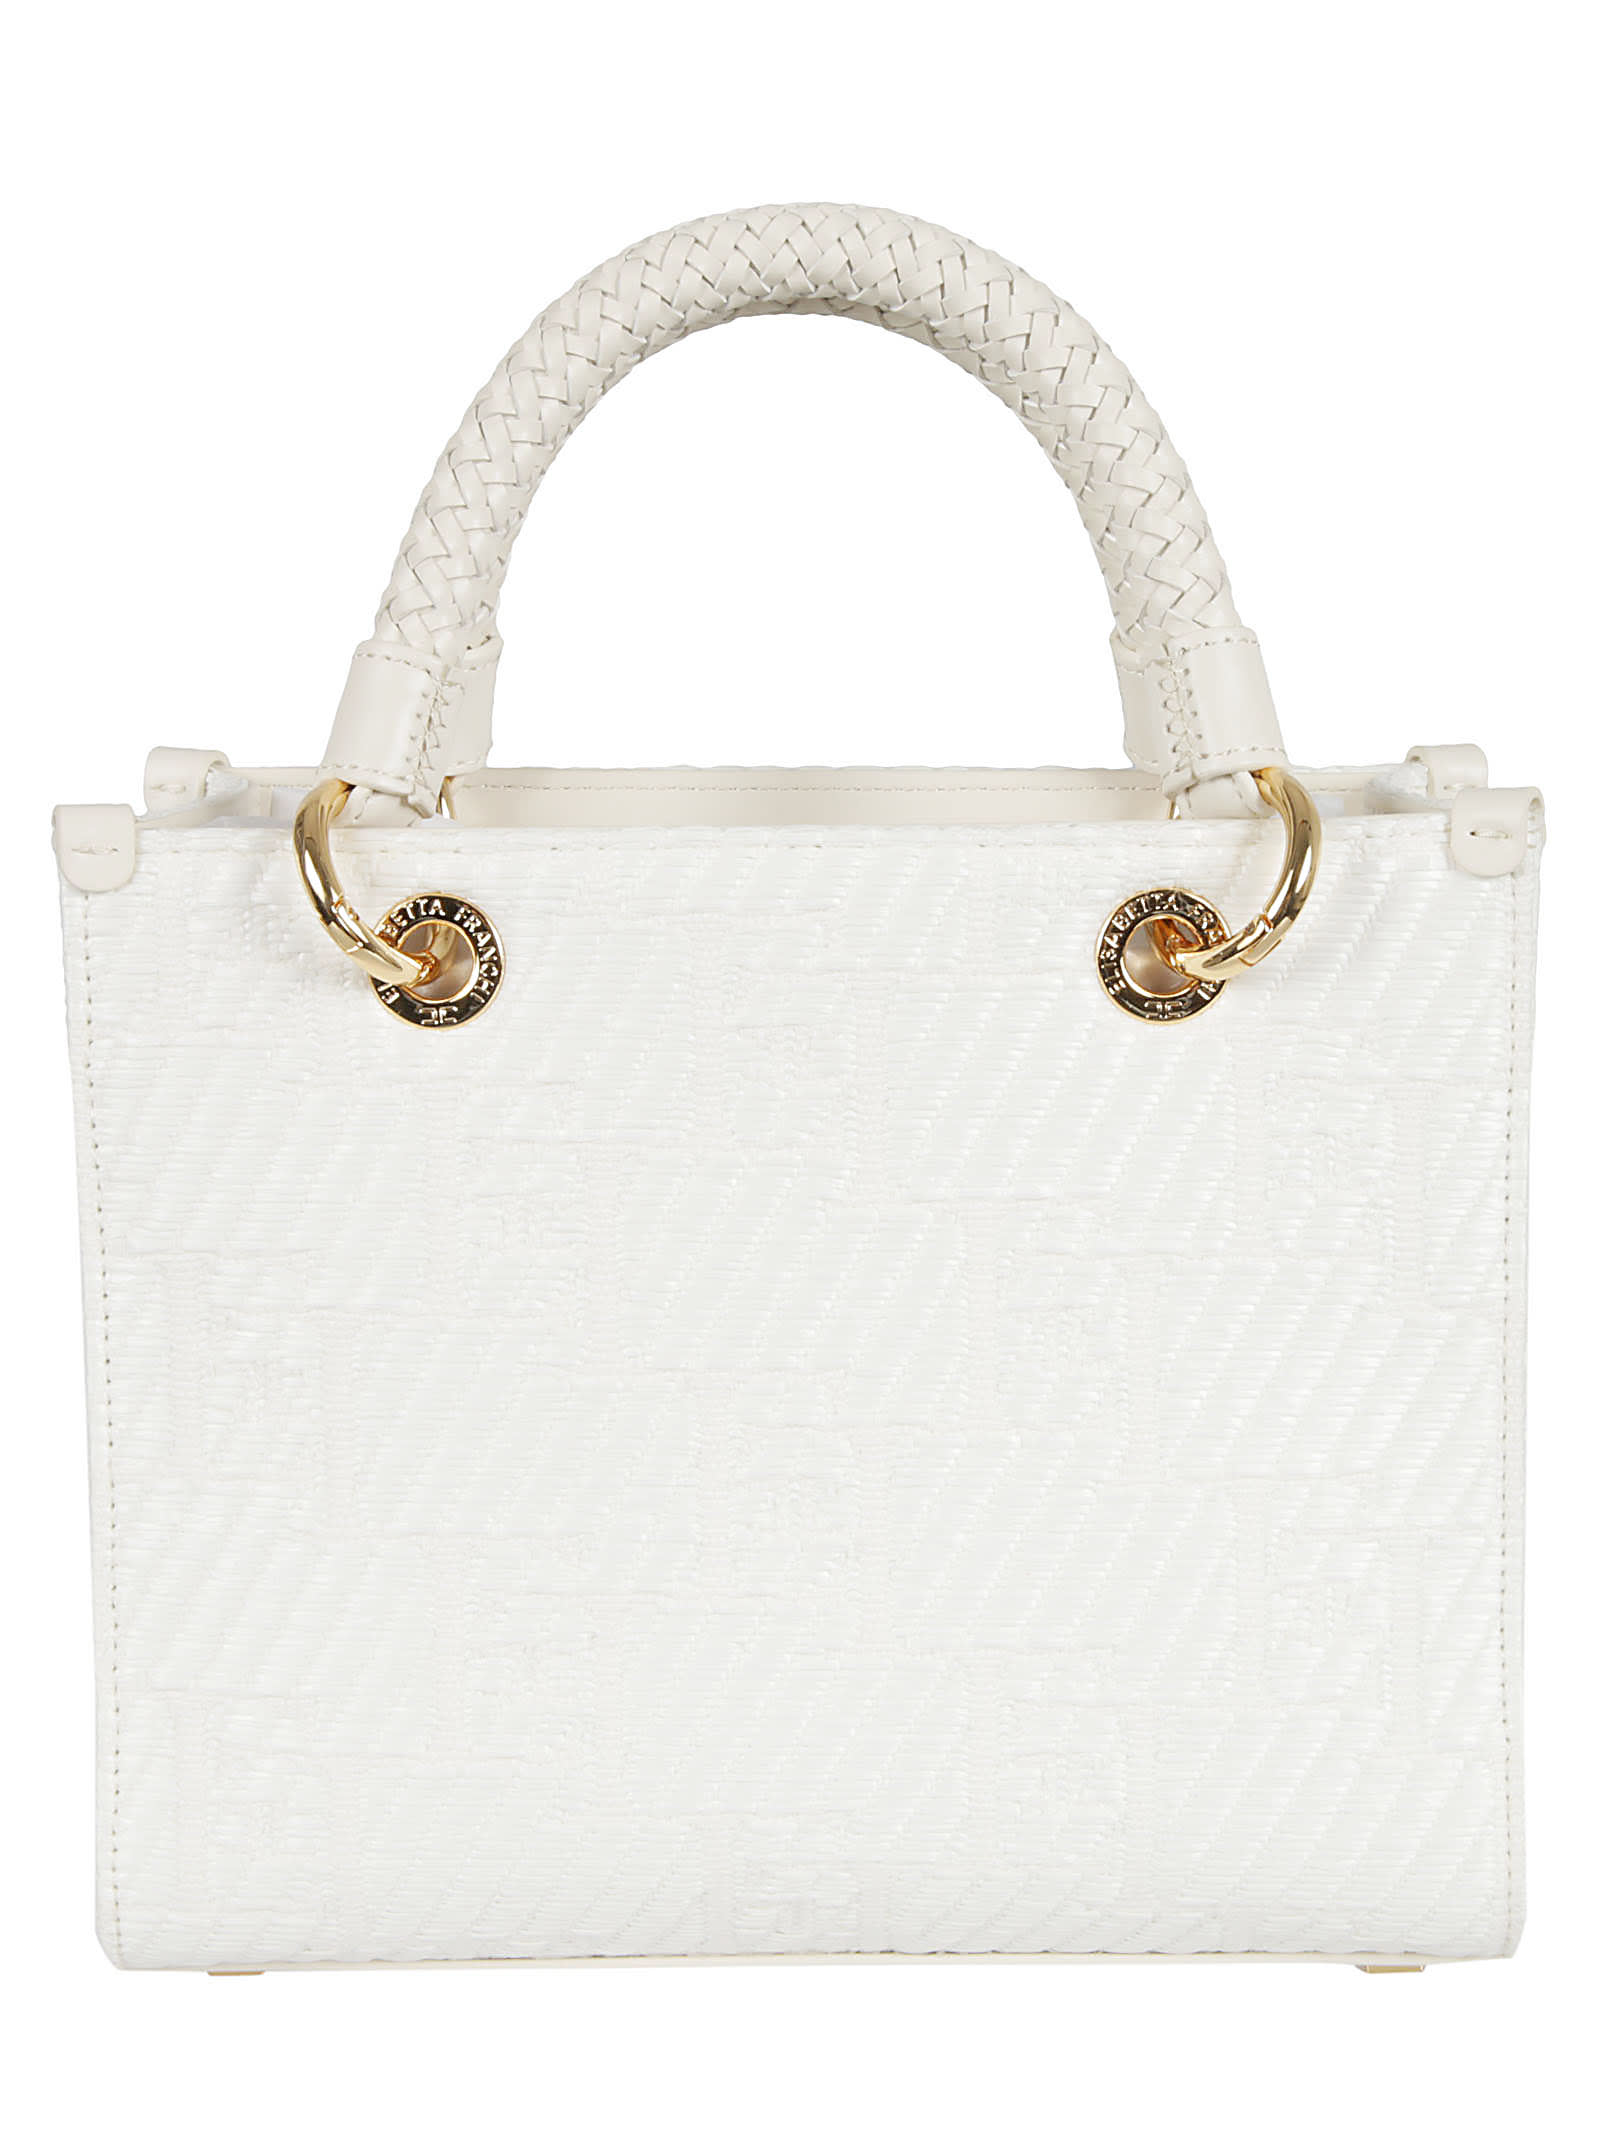 Woven Top Handle Patterned Tote